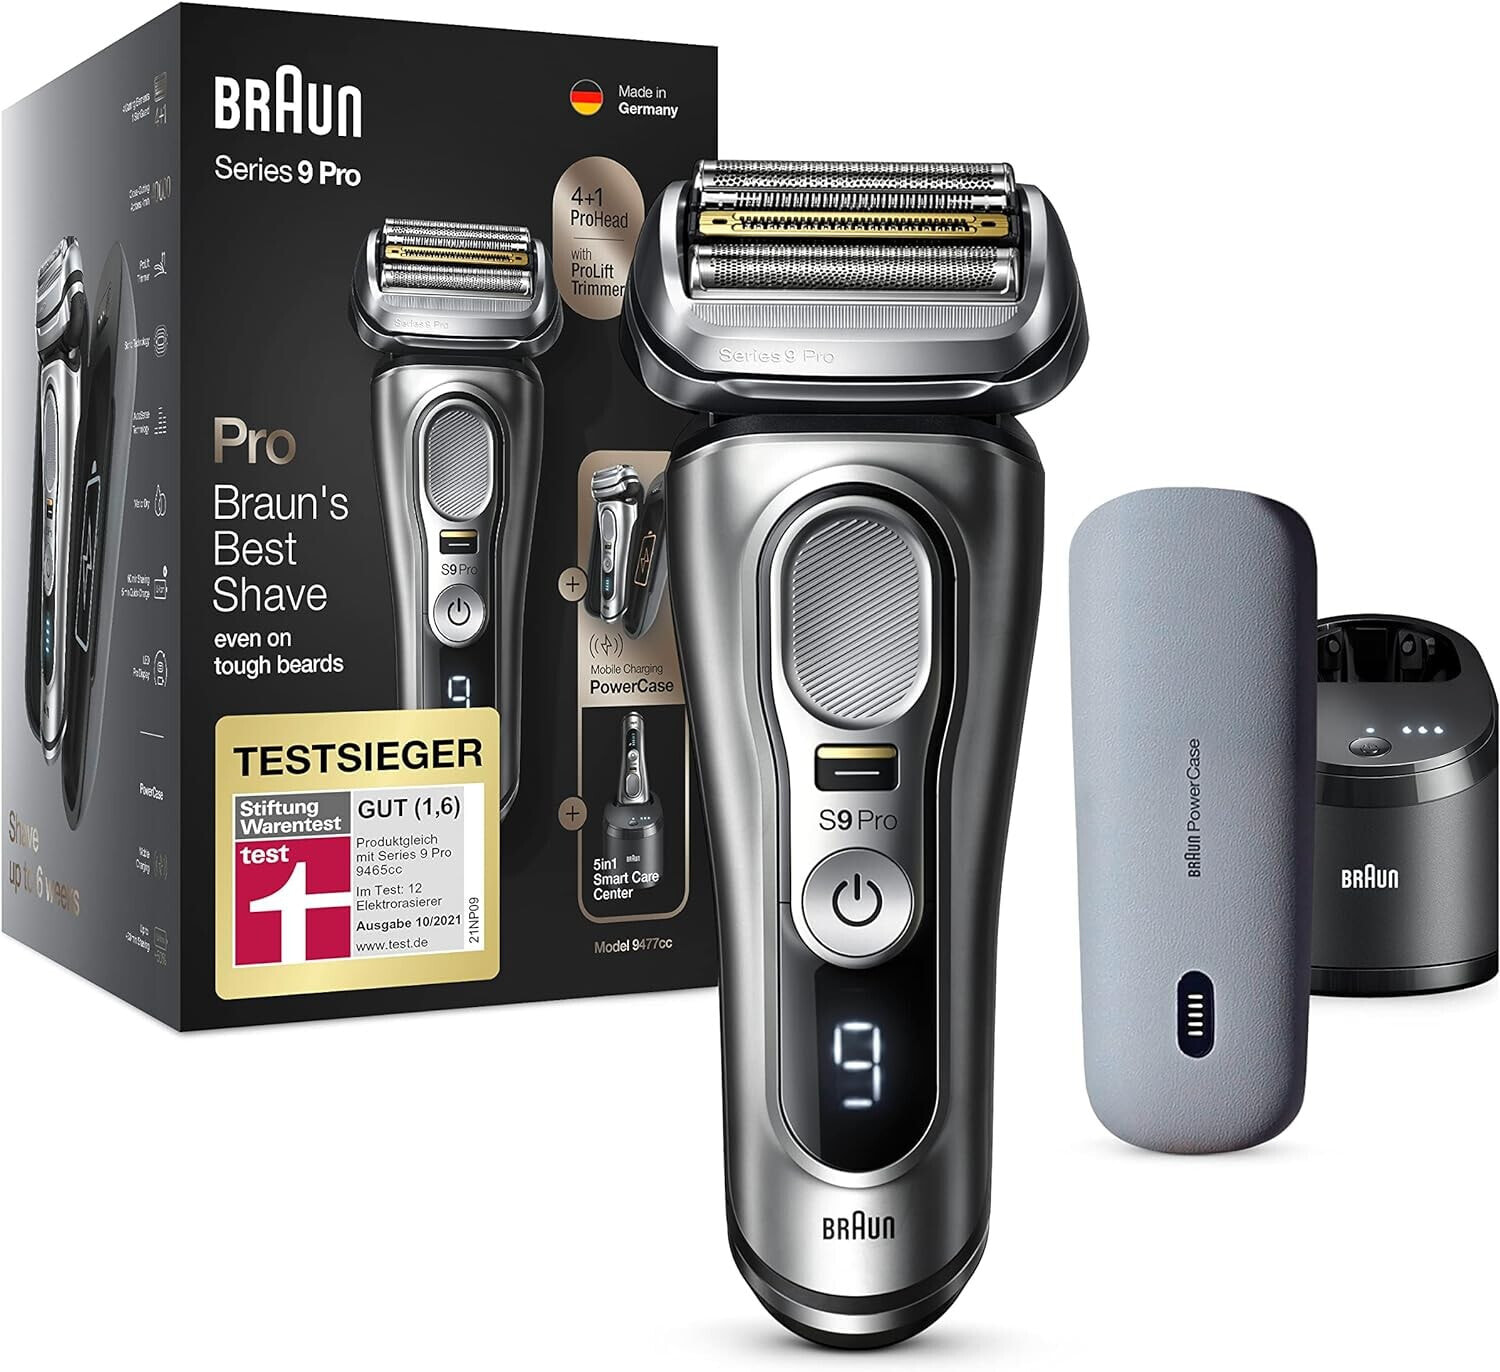 Braun Series 9 Pro Premium Men's Razor with 4+1 Shaving Head, Electric Shaver & ProLift Trimmer, 60 Minutes Battery Life, Wet & Dry Use on s 1, 3 and 7 Day Beard, 9415s